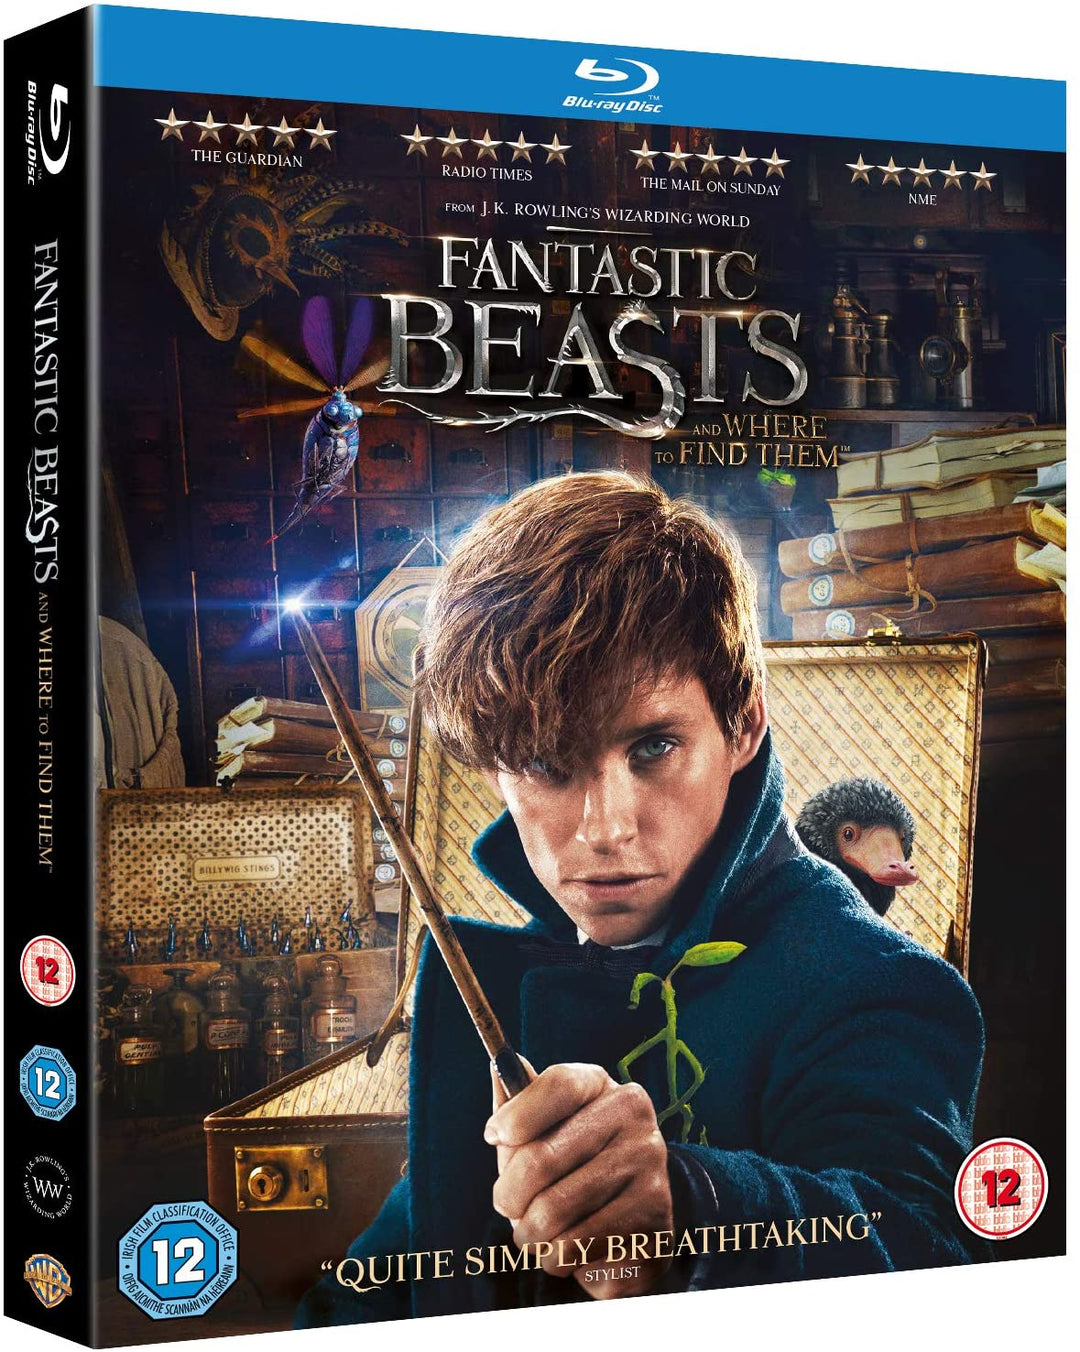 Fantastic Beasts and Where To Find Them [Blu-ray + Digital Download] [2016]